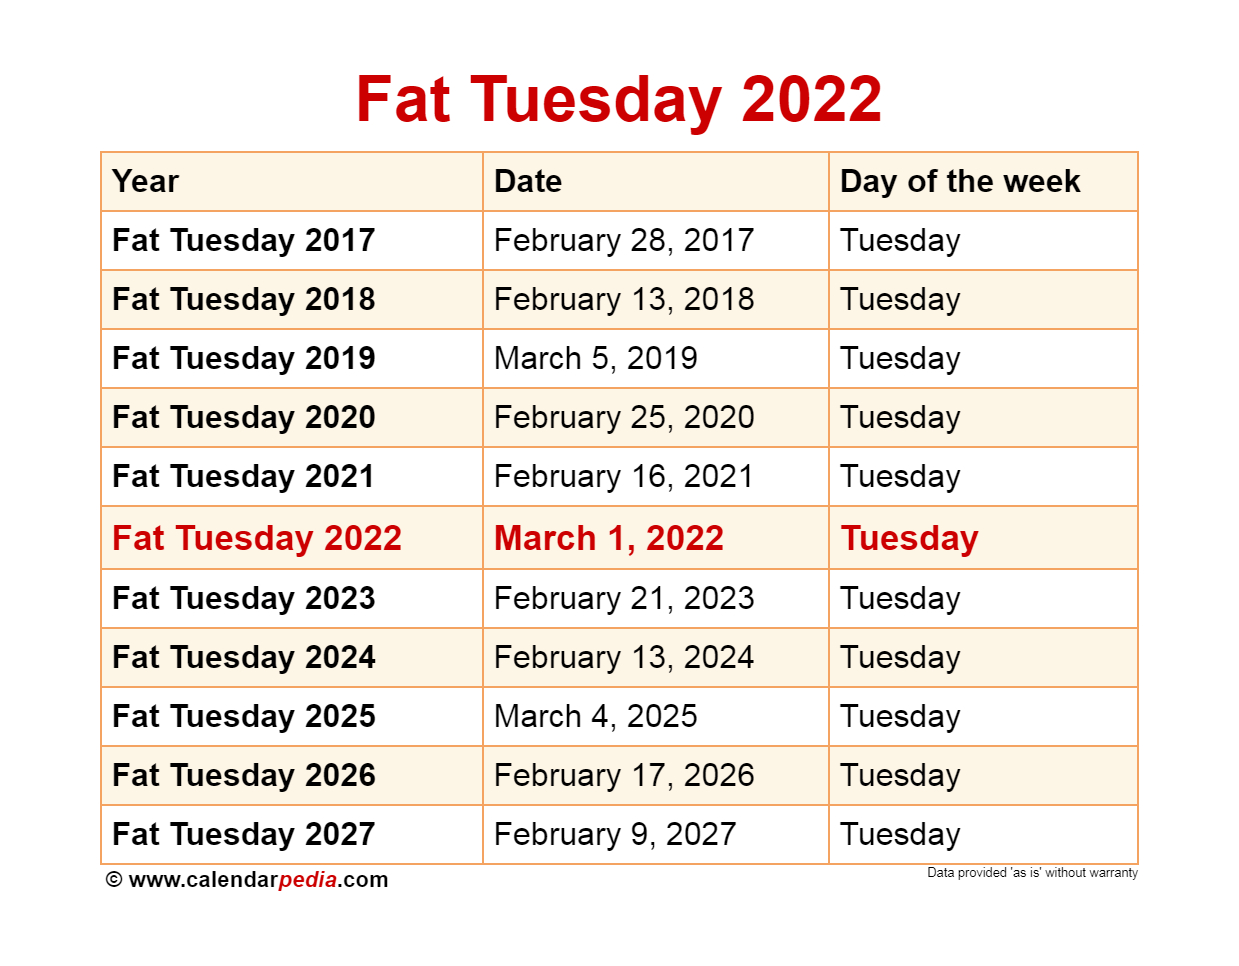 When Is Fat Tuesday 2022?